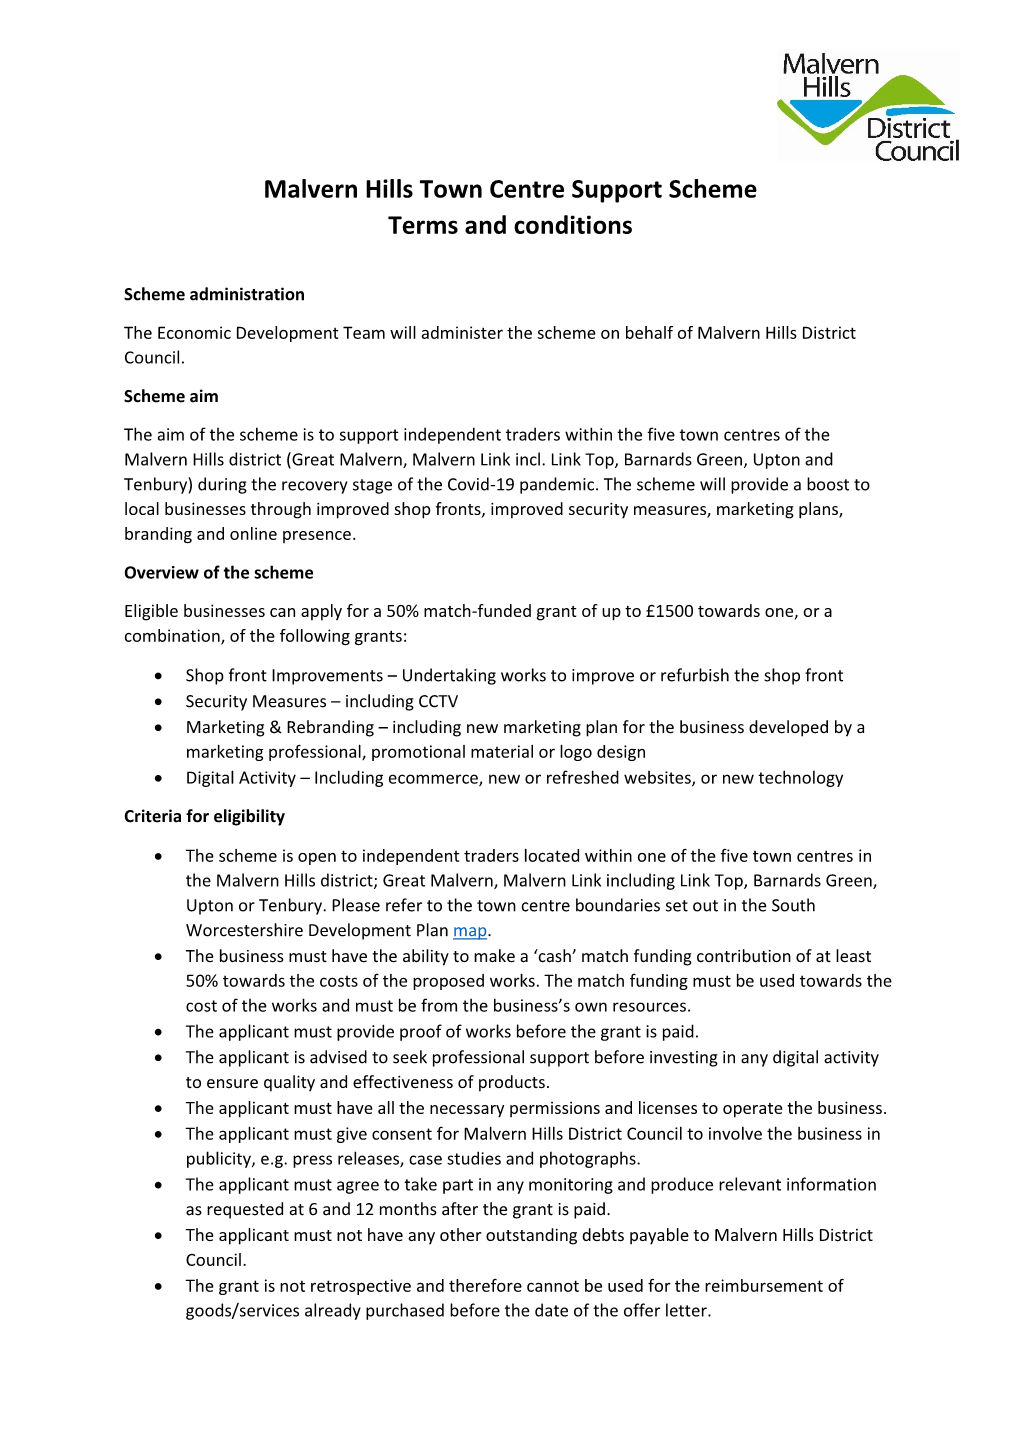 Malvern Hills Town Centre Support Scheme Terms and Conditions